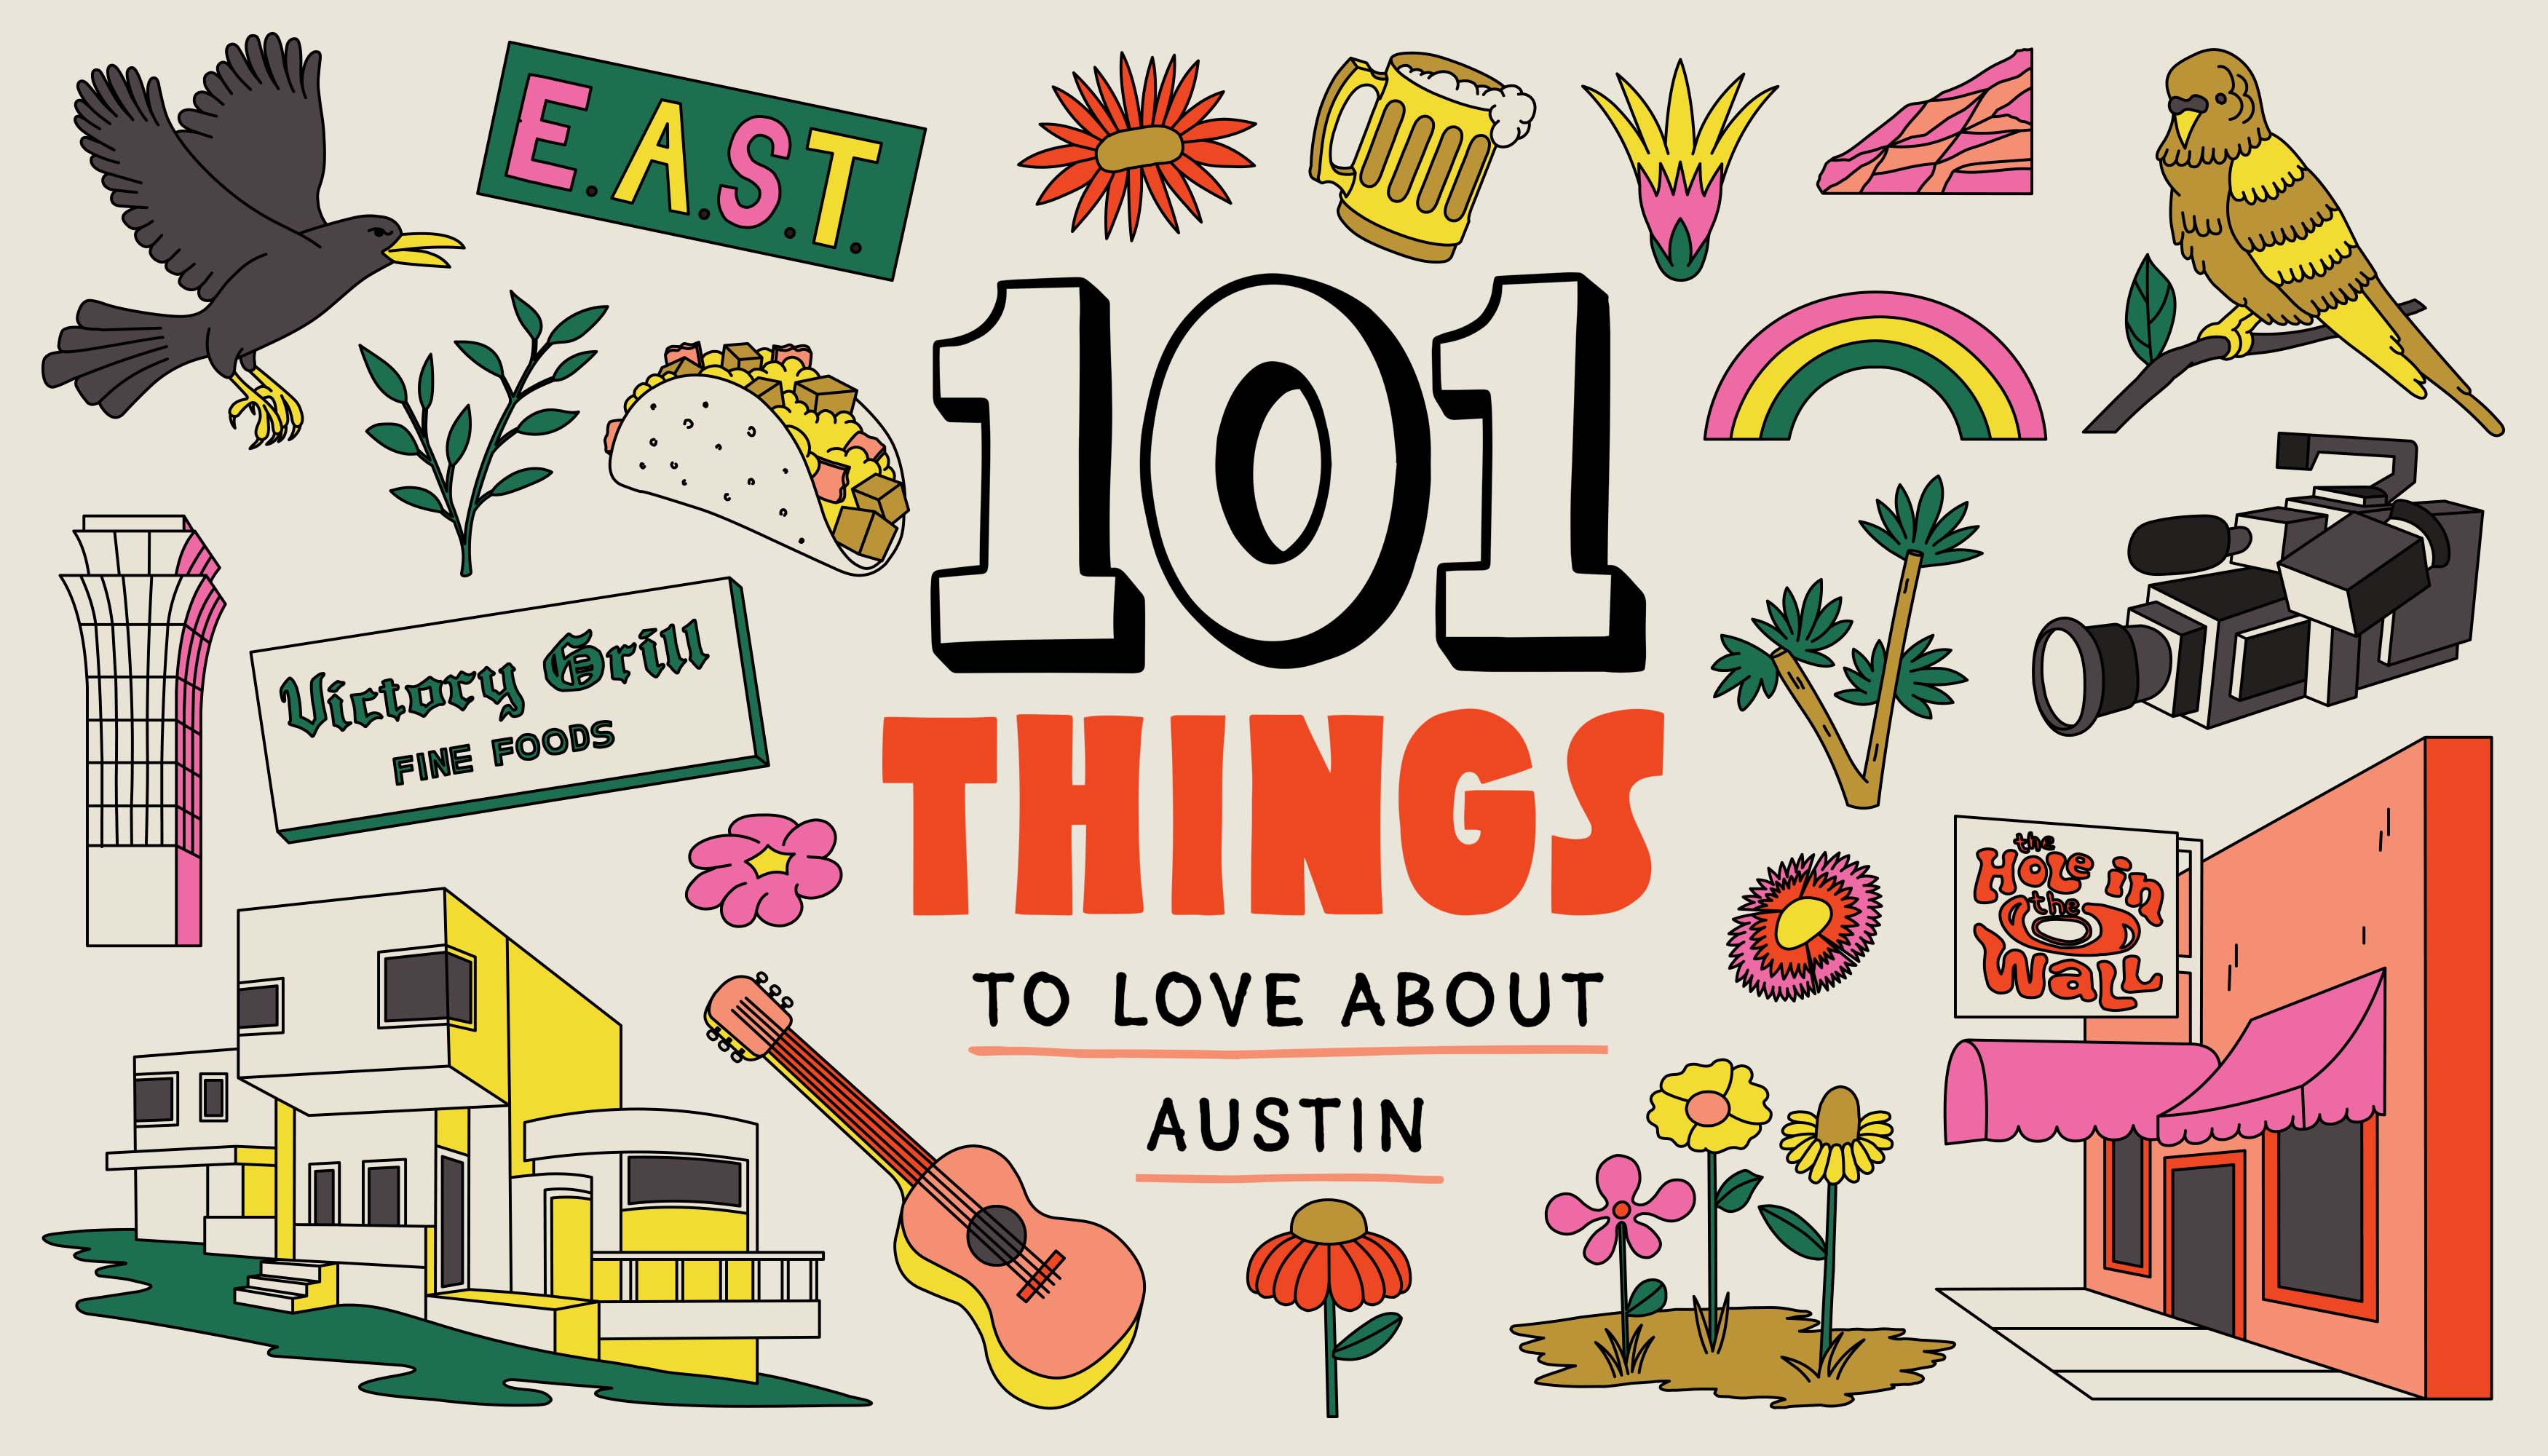 Illustration of the words “101 Things To Love About Austin” with drawings of of a grackle, a beer mug, a breakfast taco, a parakeet, a film camera, the club Hole in the Wall, a guitar, an Art Deco house, the Victory Grill sign, and flowers around it.